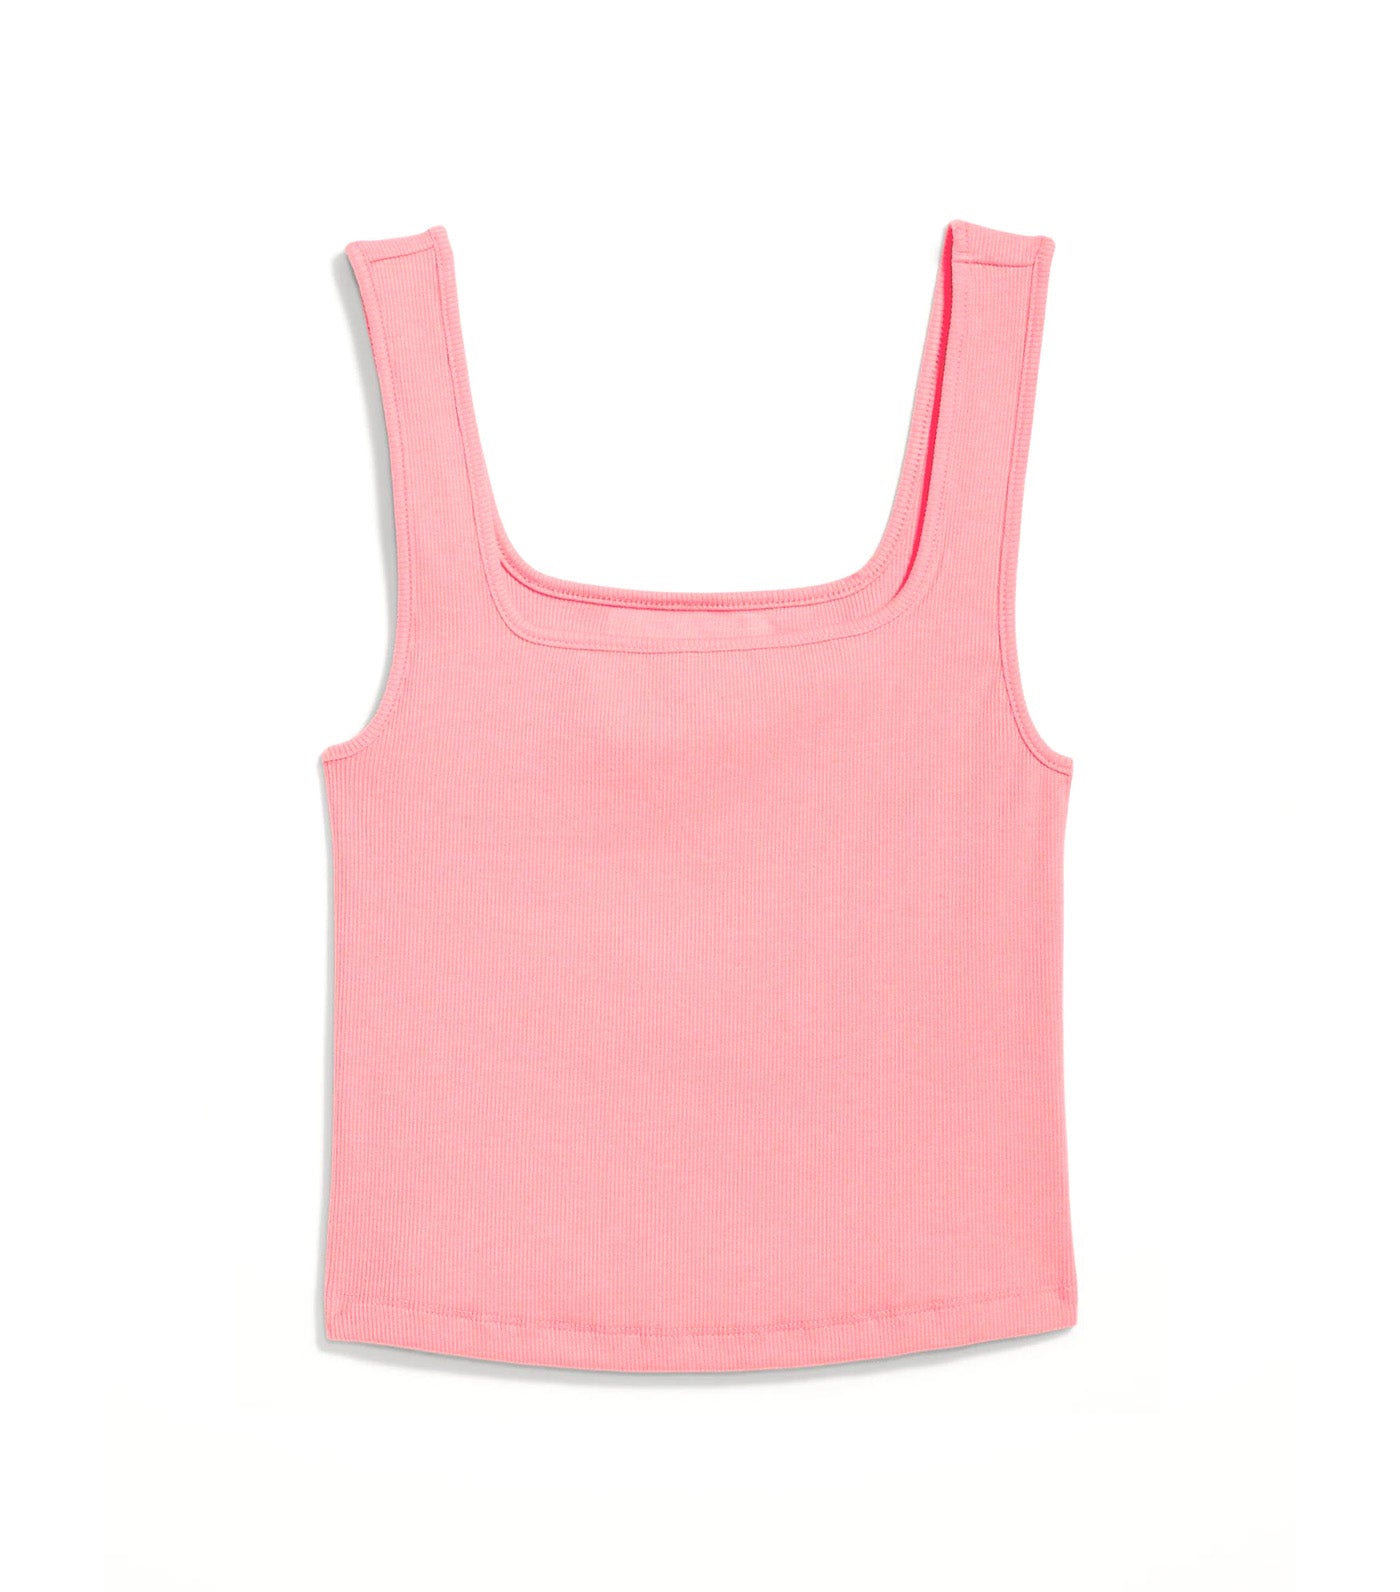 Fitted Square-Neck Ultra-Cropped Rib-Knit Tank Top for Women Heartfelt